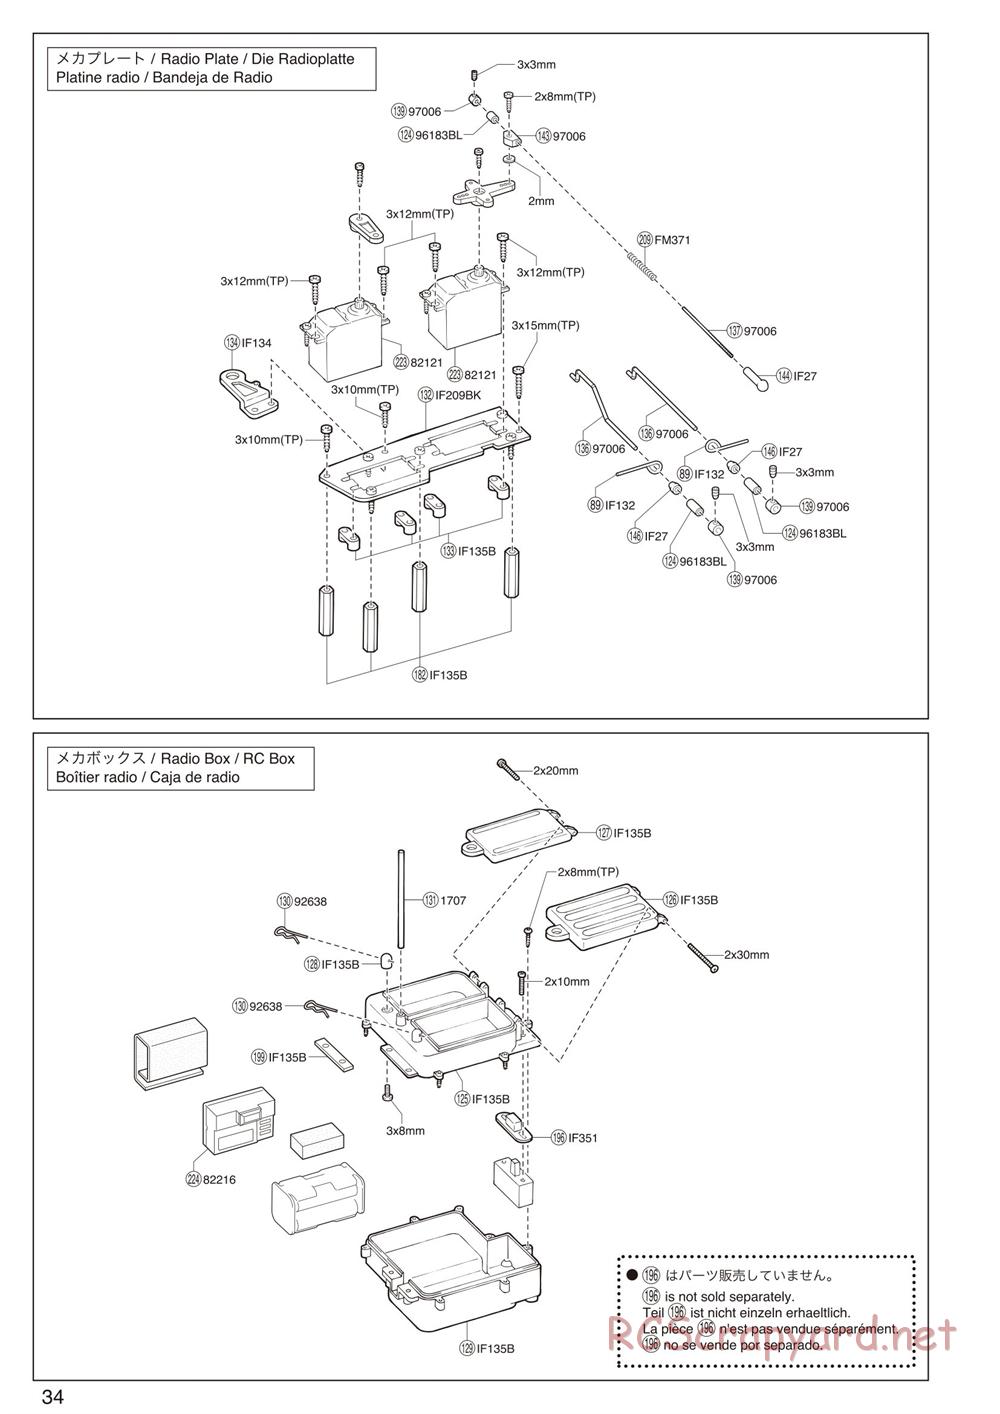 Kyosho - Inferno Neo 2.0 - Exploded Views - Page 3